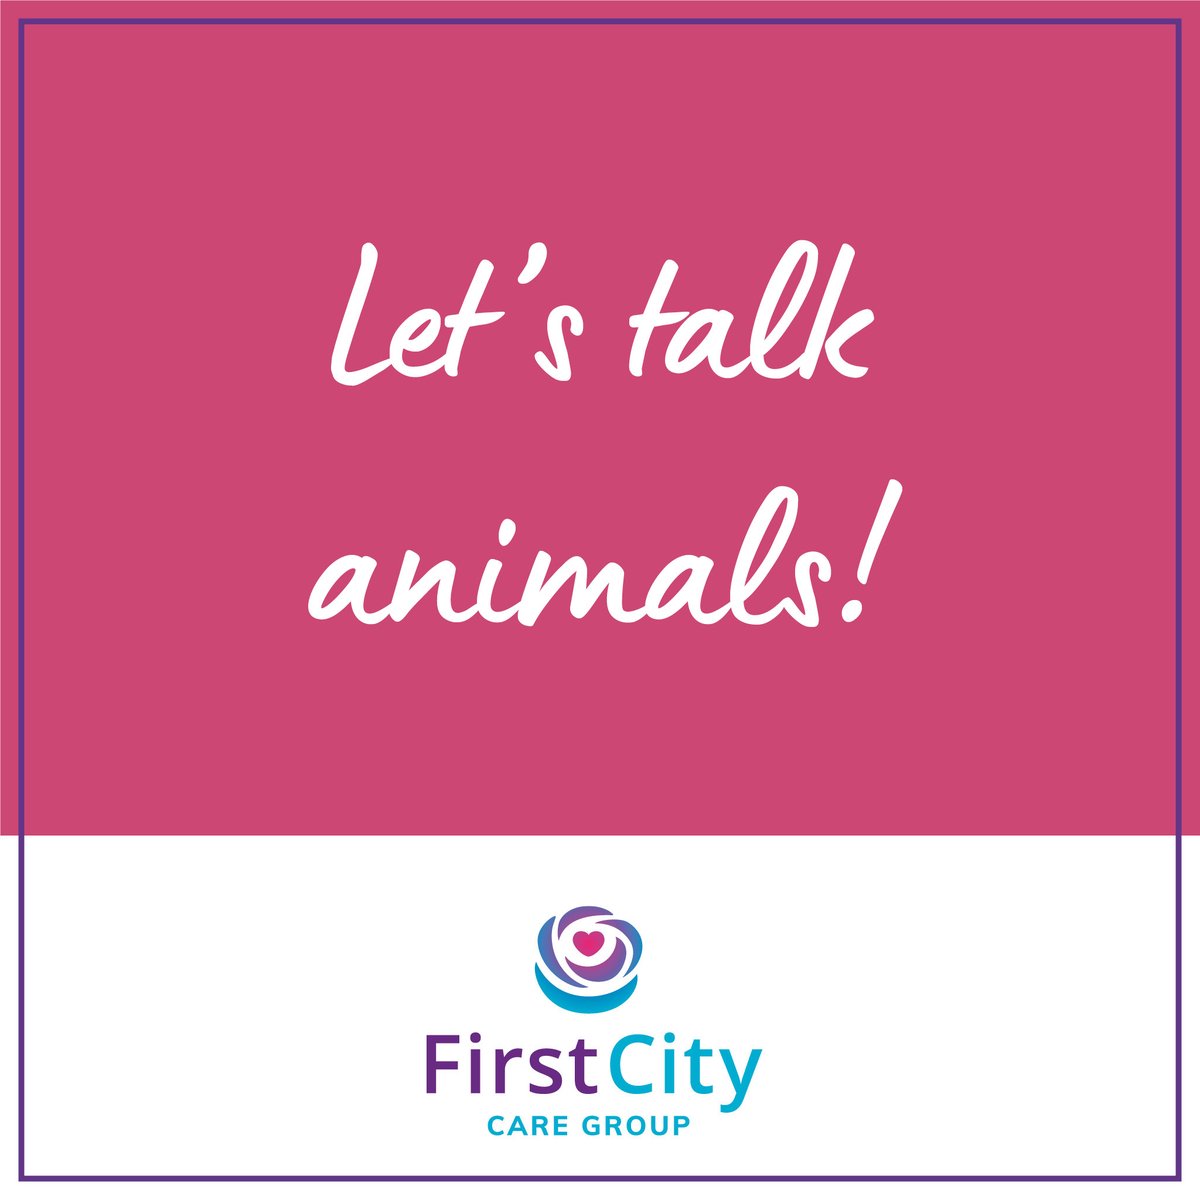 What's your favourite animal? Let us know in the comments below...

#TuesdayThoughts #TuesdayTopic #Gettoknowyourcolleagues #gettoknowme #Shareyourthoughts